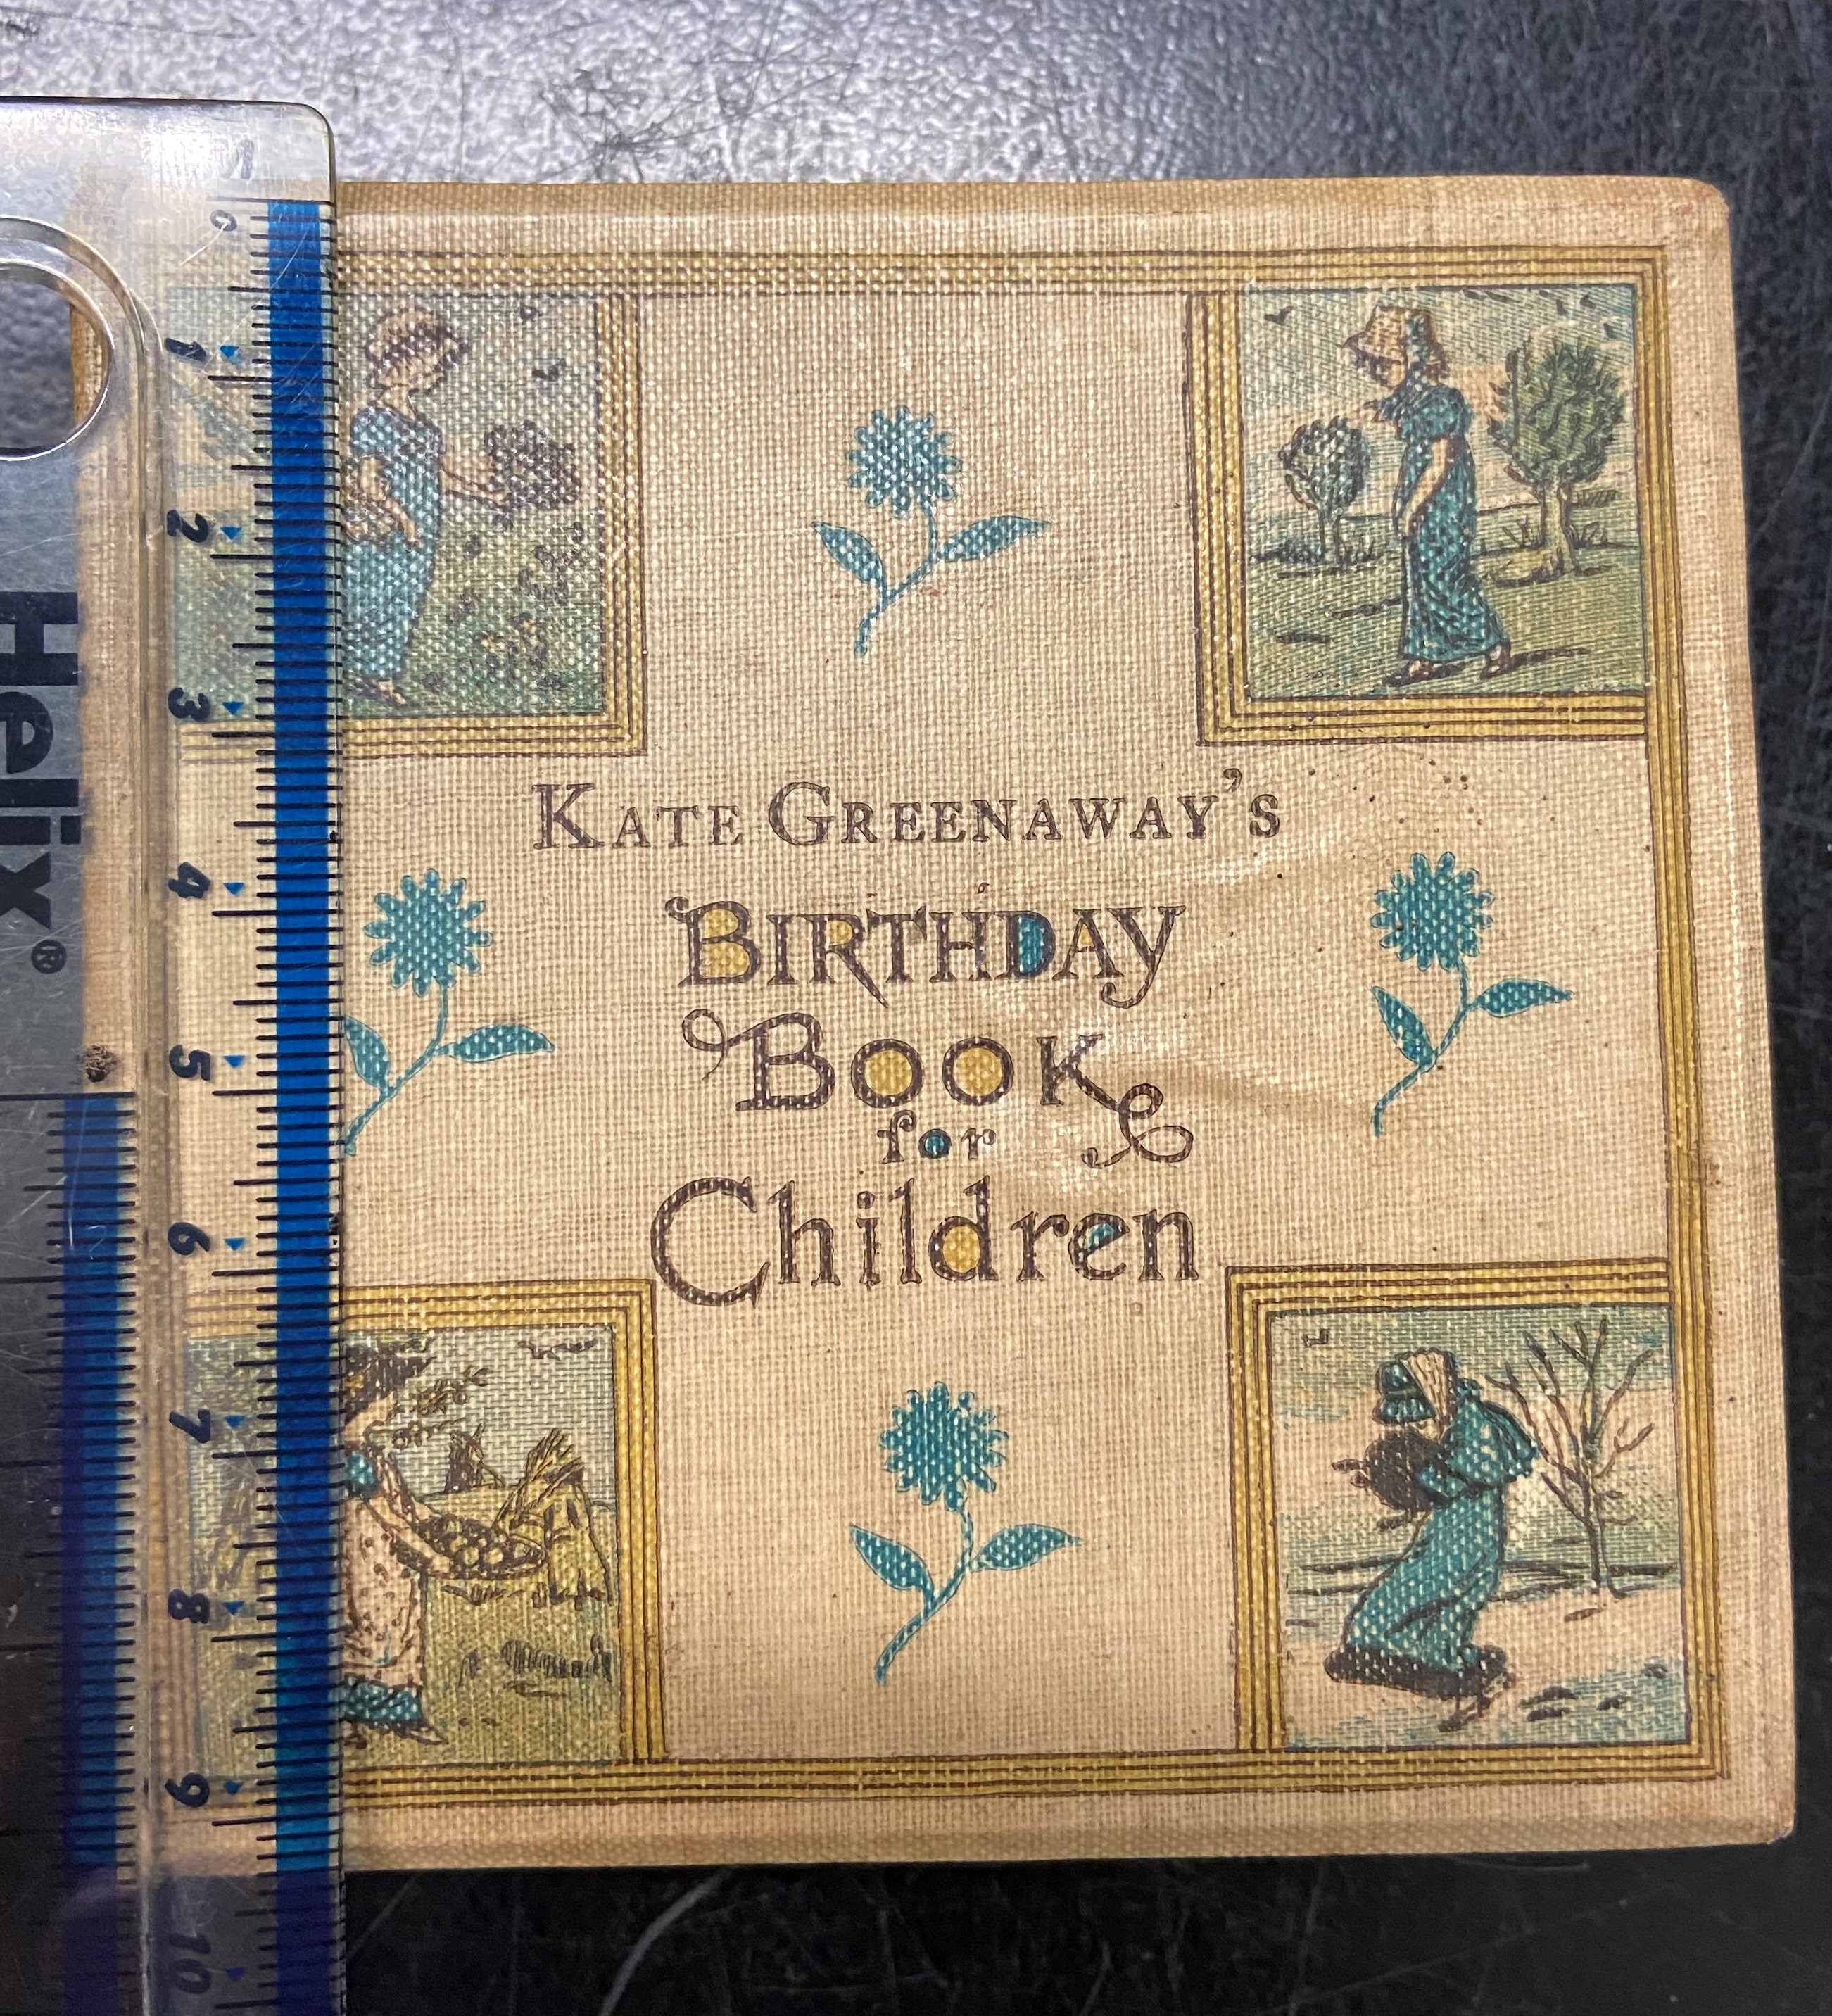 A tiny book found in our Victorian Children's Literature collection, containing a poem for every day of the year